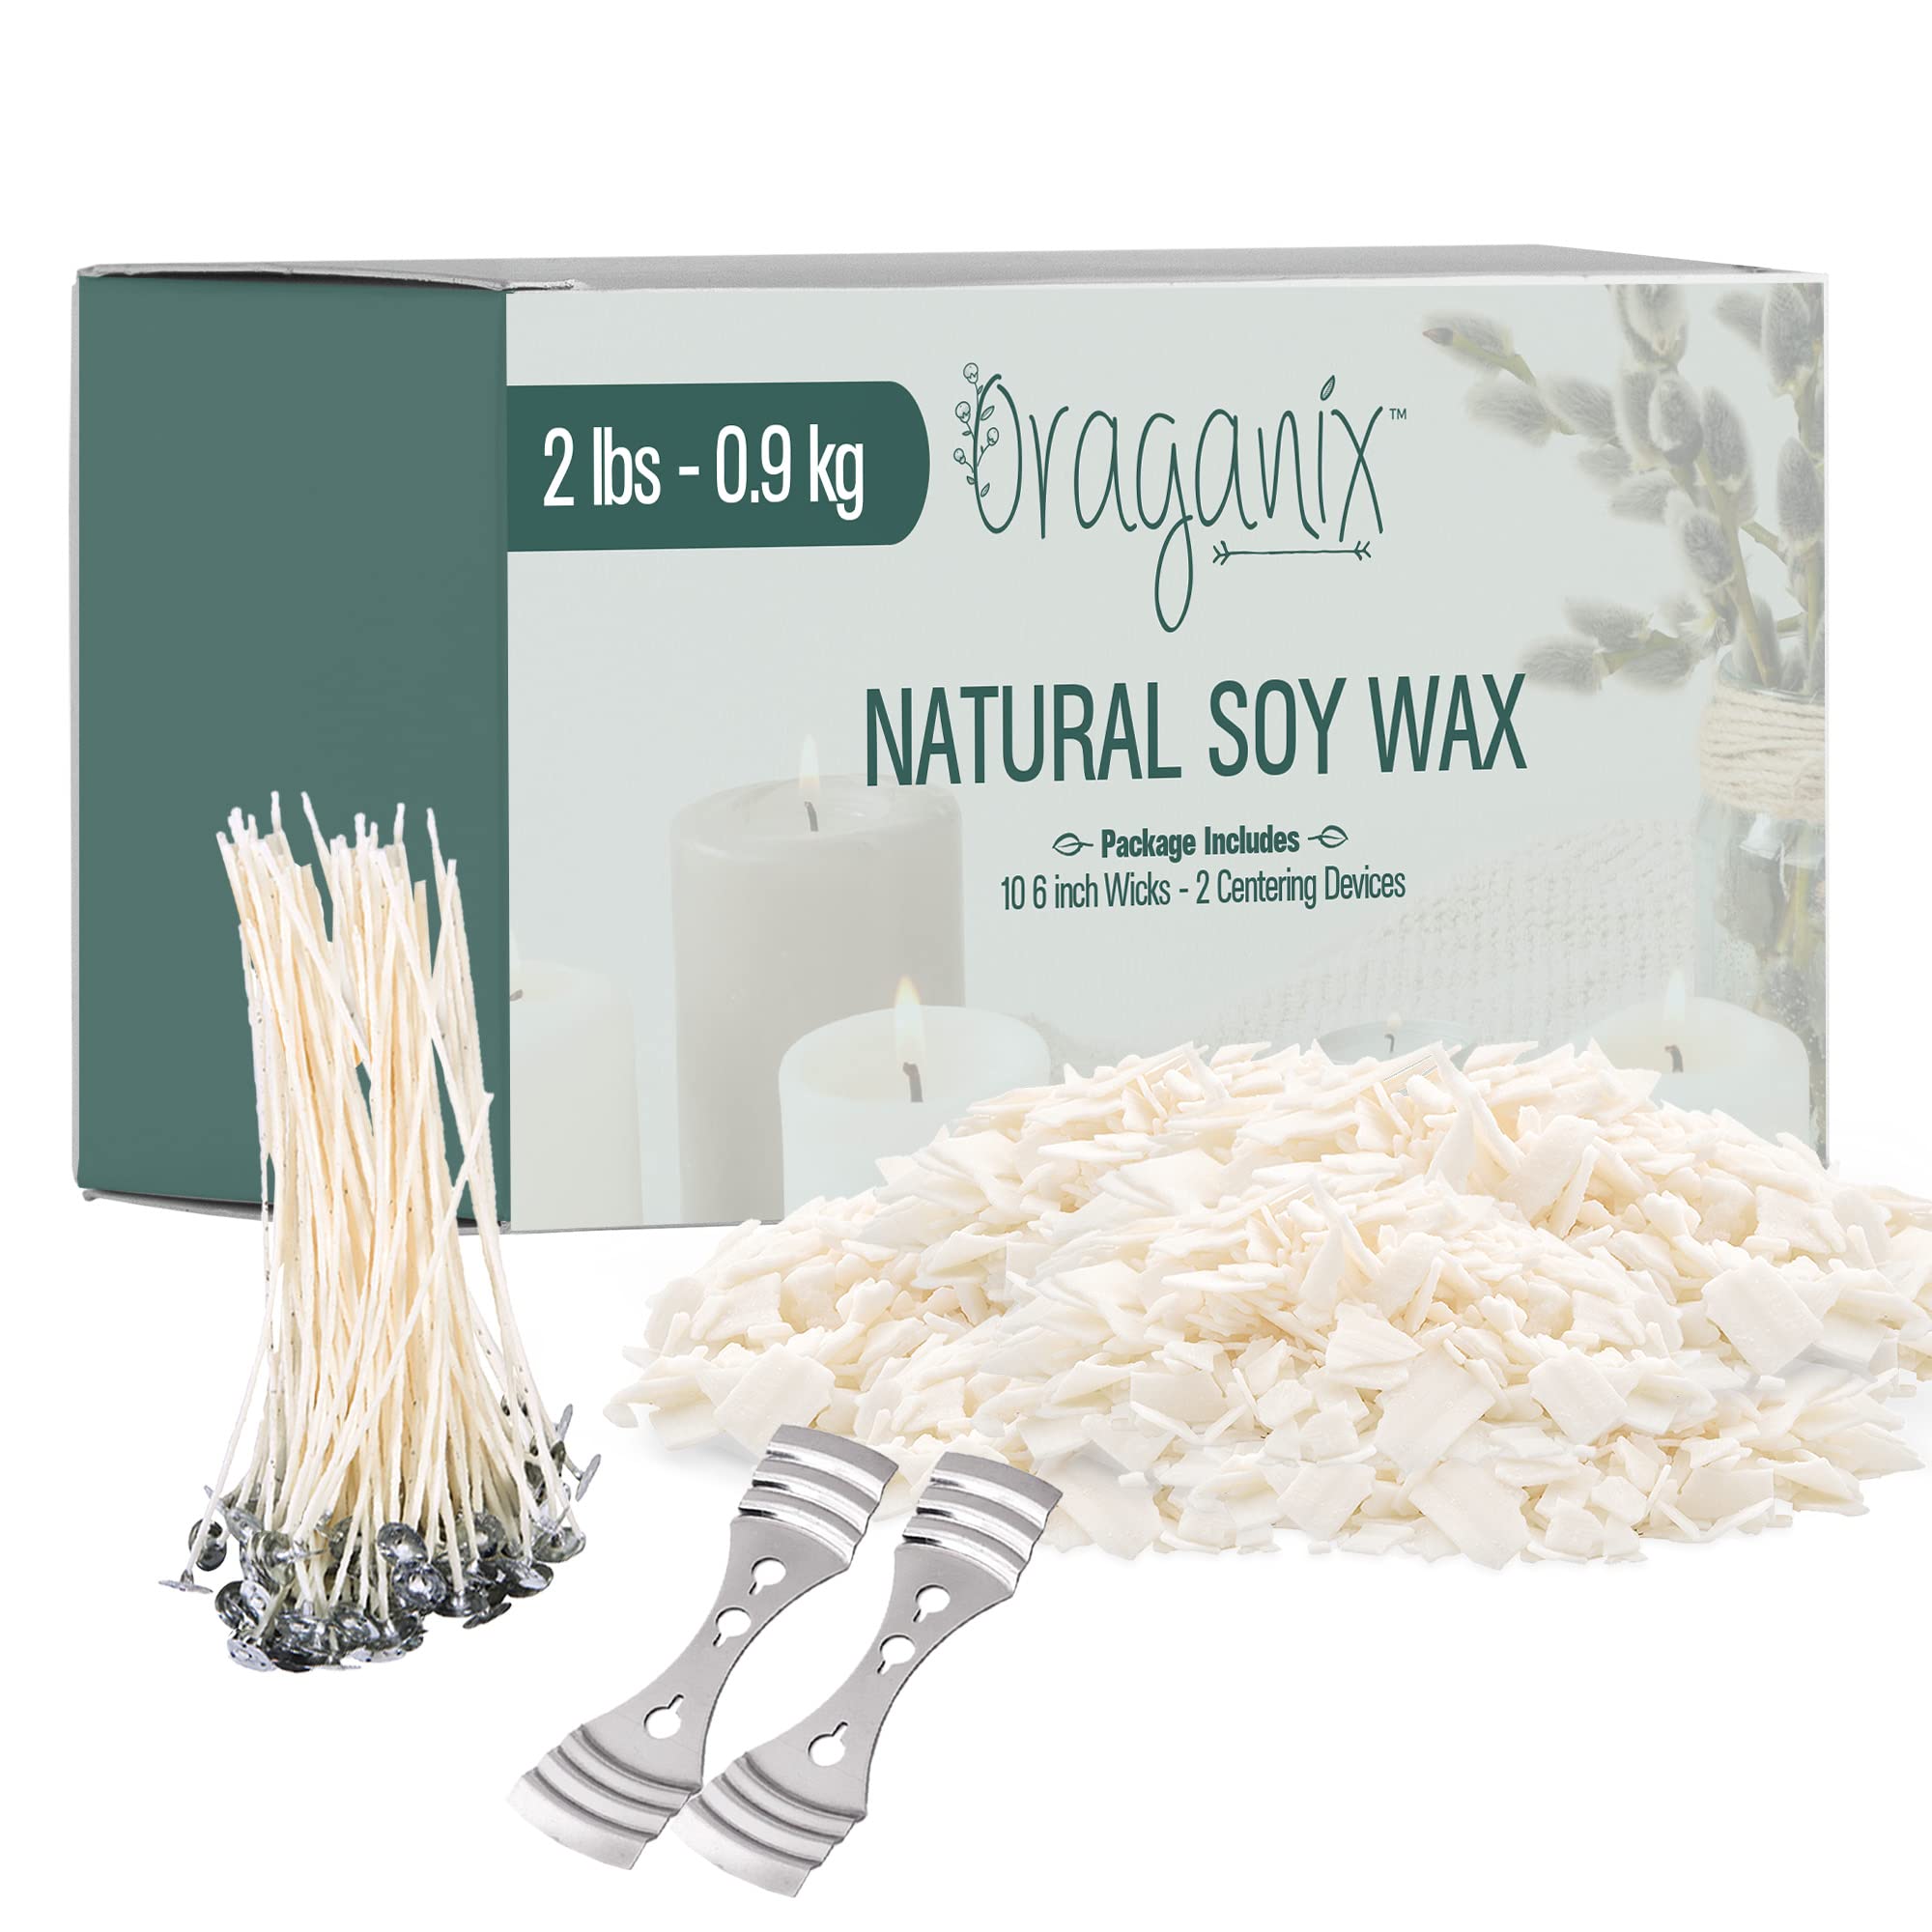 Oraganix Natural Soy Wax DIY Candle Making Kit and Candle Making Supplies - Premium Soy Candle Wax, 100 6-Inch Pre-Waxed Candle Wicks, 2 Metal Centering Devices  - Like New